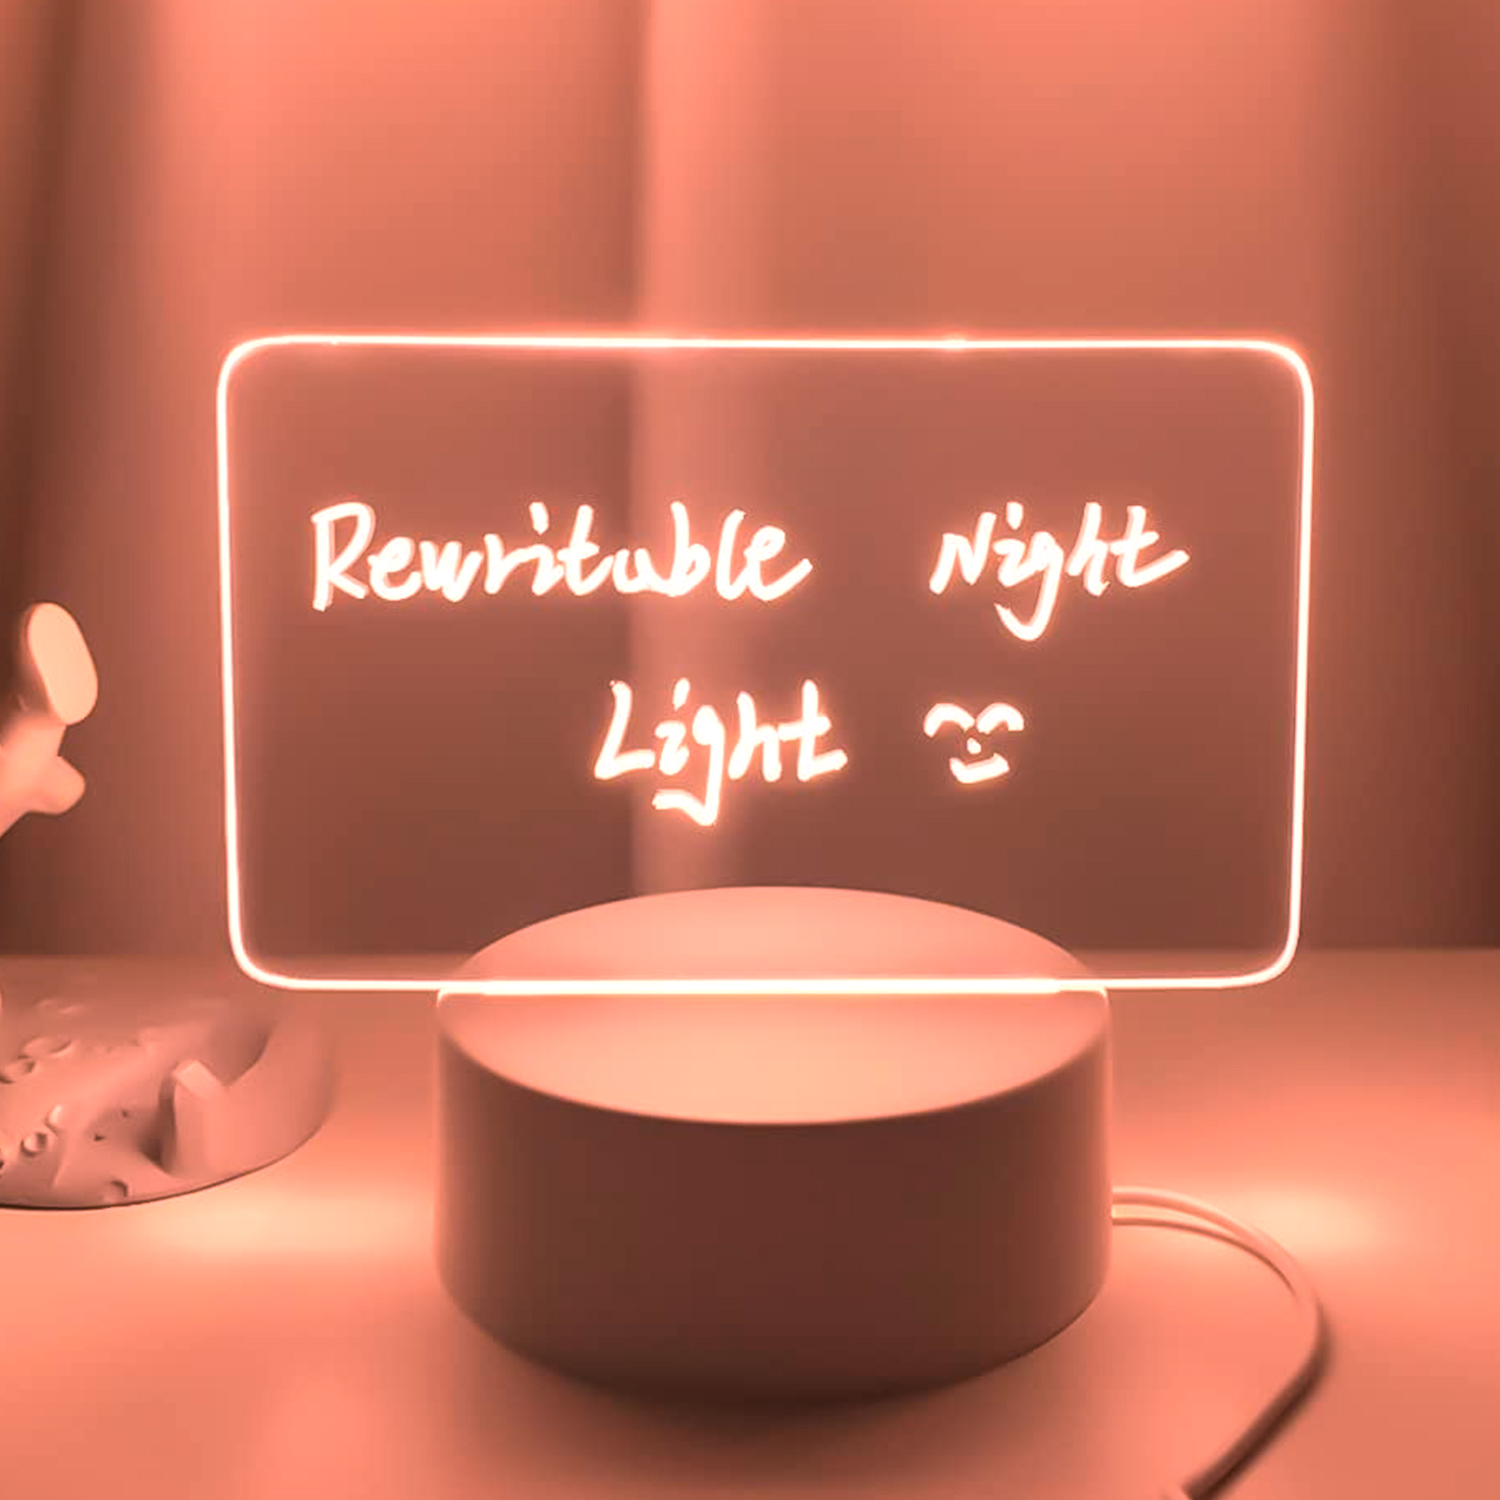 acrylic table lamp with led night light